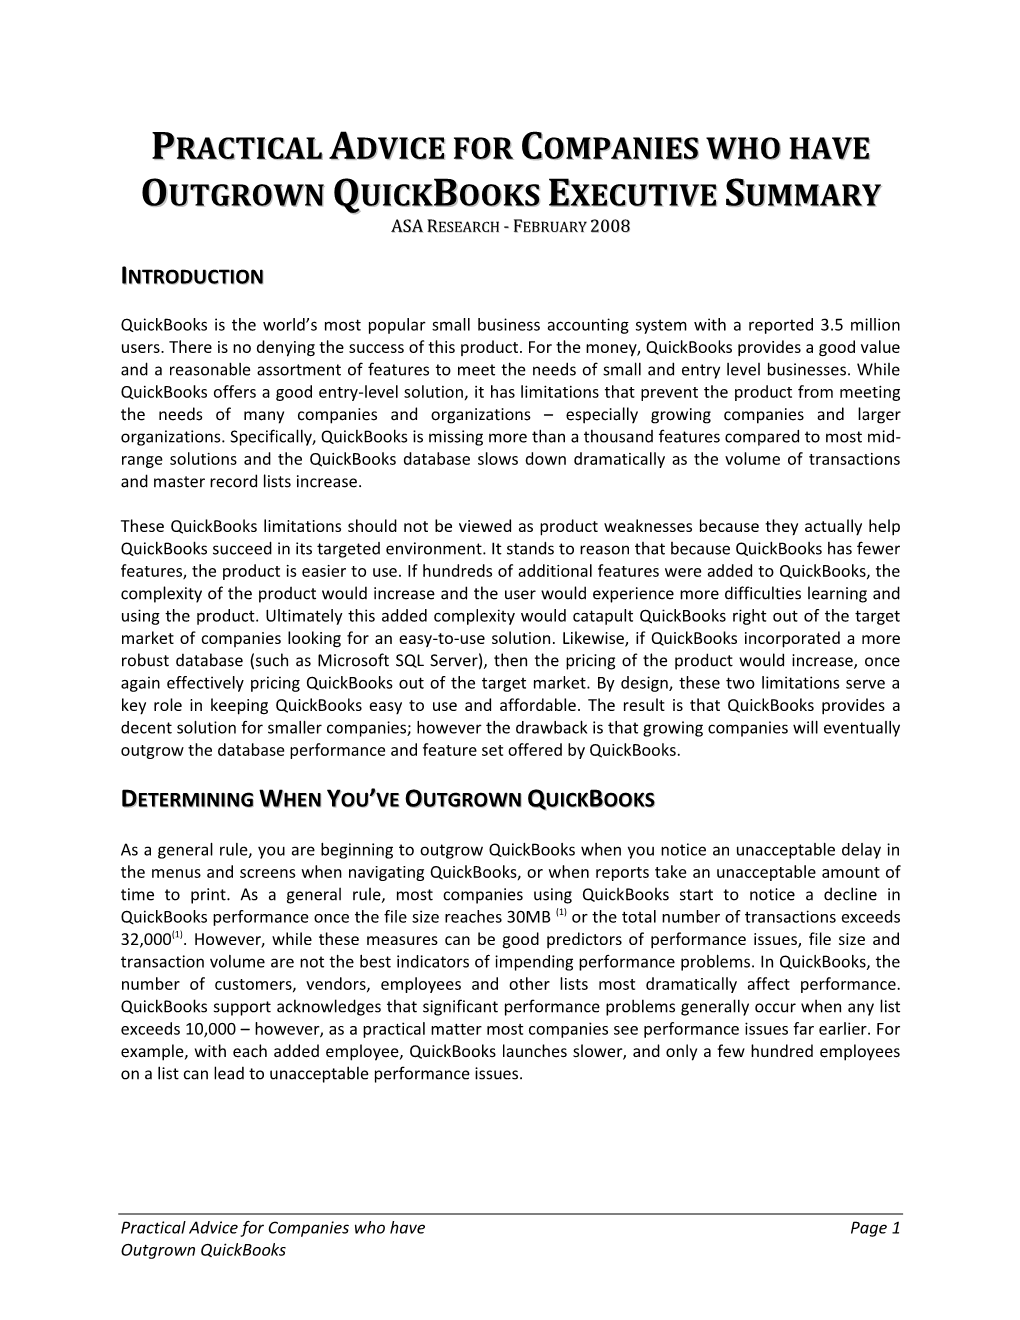 Practical Advice for Companies Who Have Outgrown Quickbooks Executive Summary Asa Research - February 2008